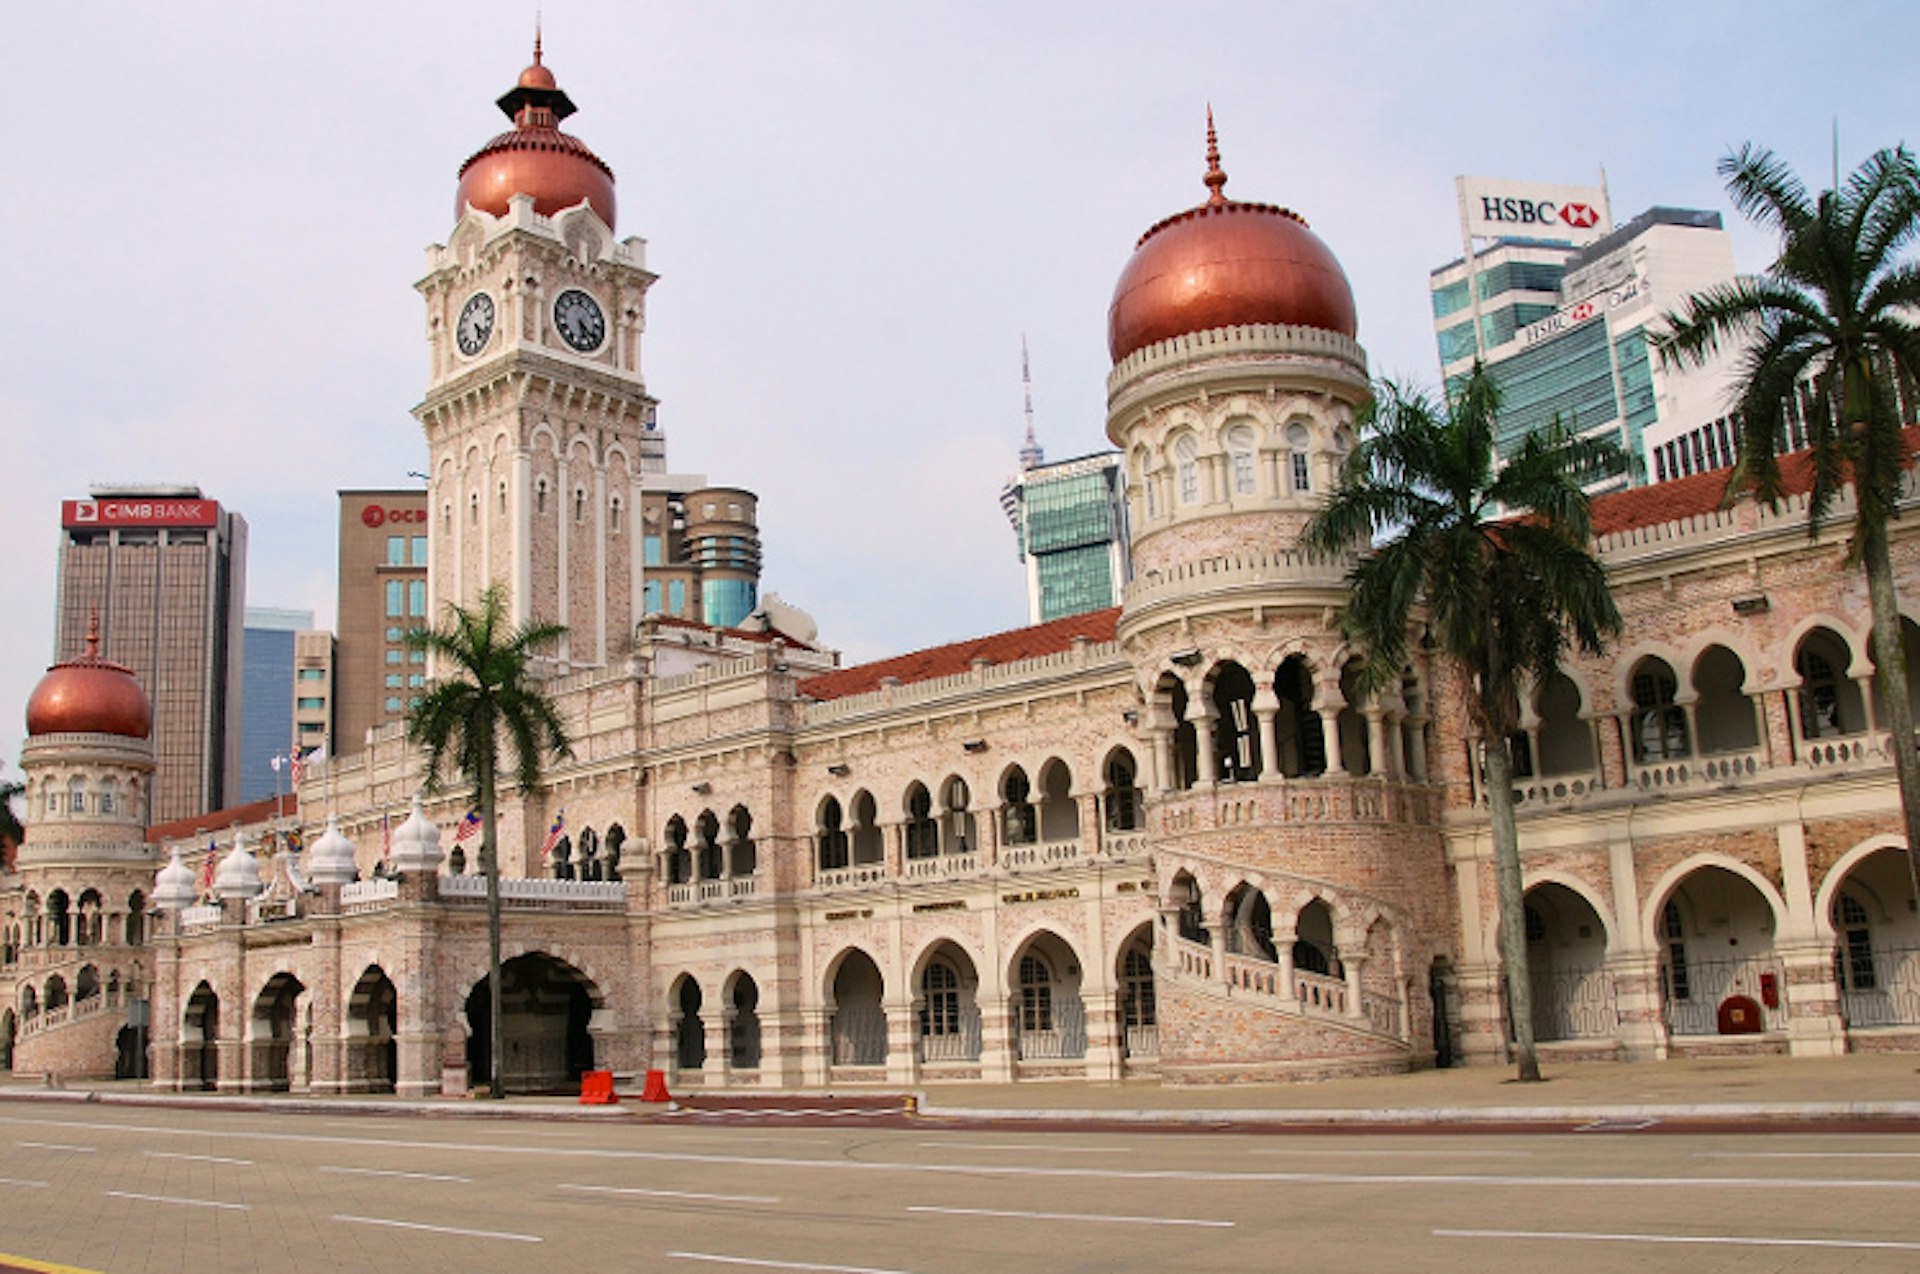 With copper-coloured domes and towers as intricately decorated as a wedding cake, the Sultan Abdul Samad Building is unmissable on a tour of KL. Image by Dimos Paraskevas / CC BY-SA 2.0